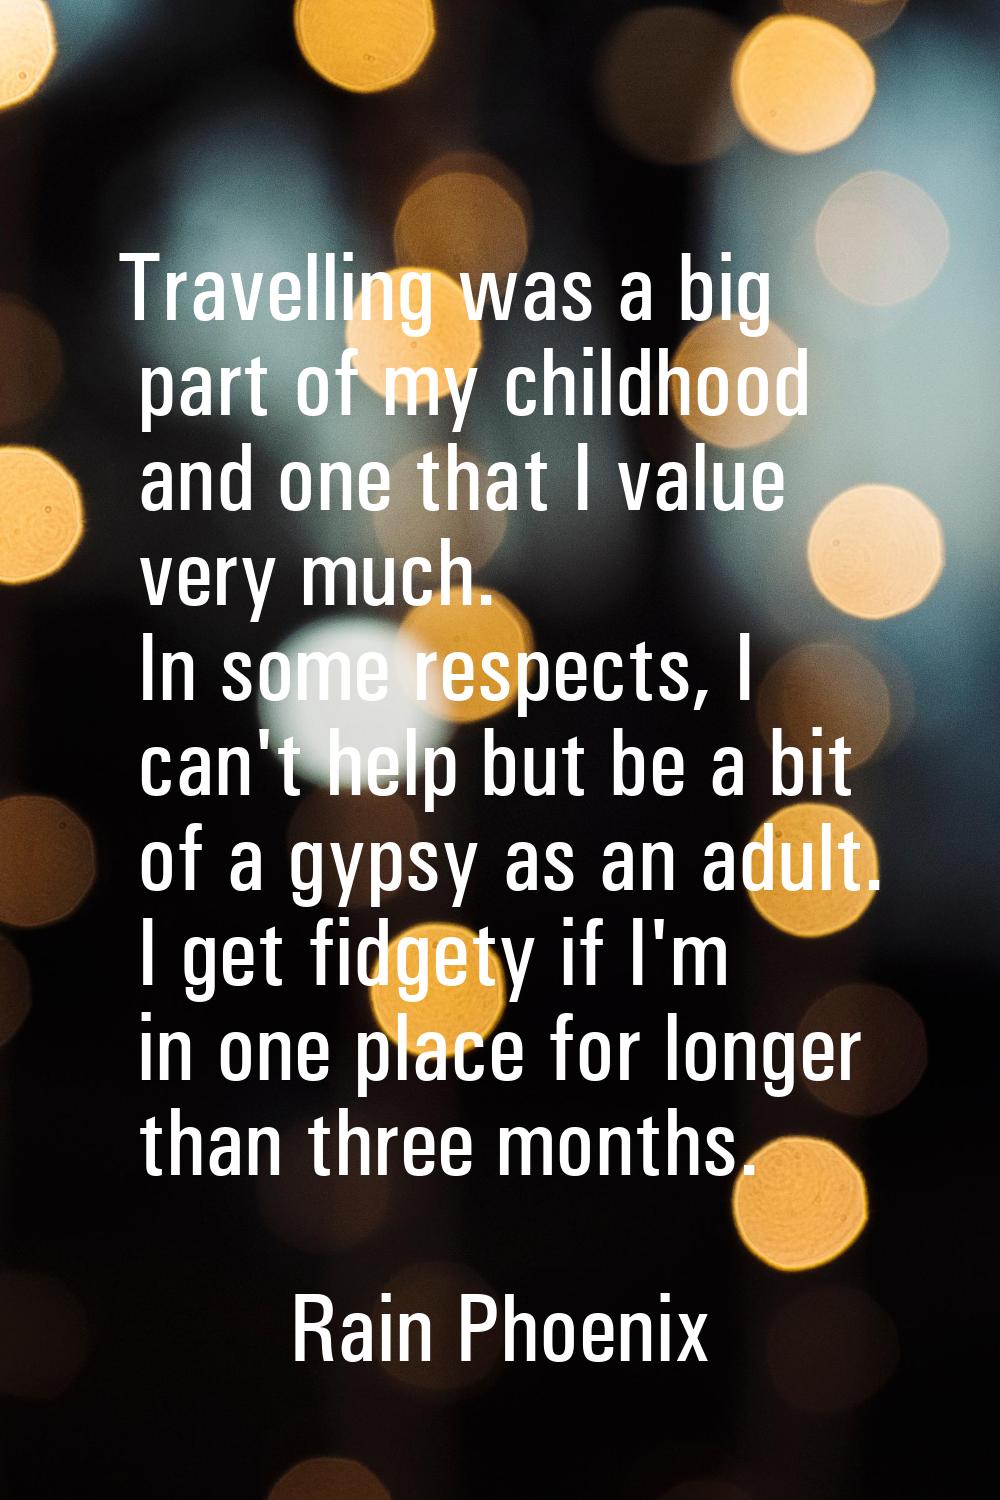 Travelling was a big part of my childhood and one that I value very much. In some respects, I can't